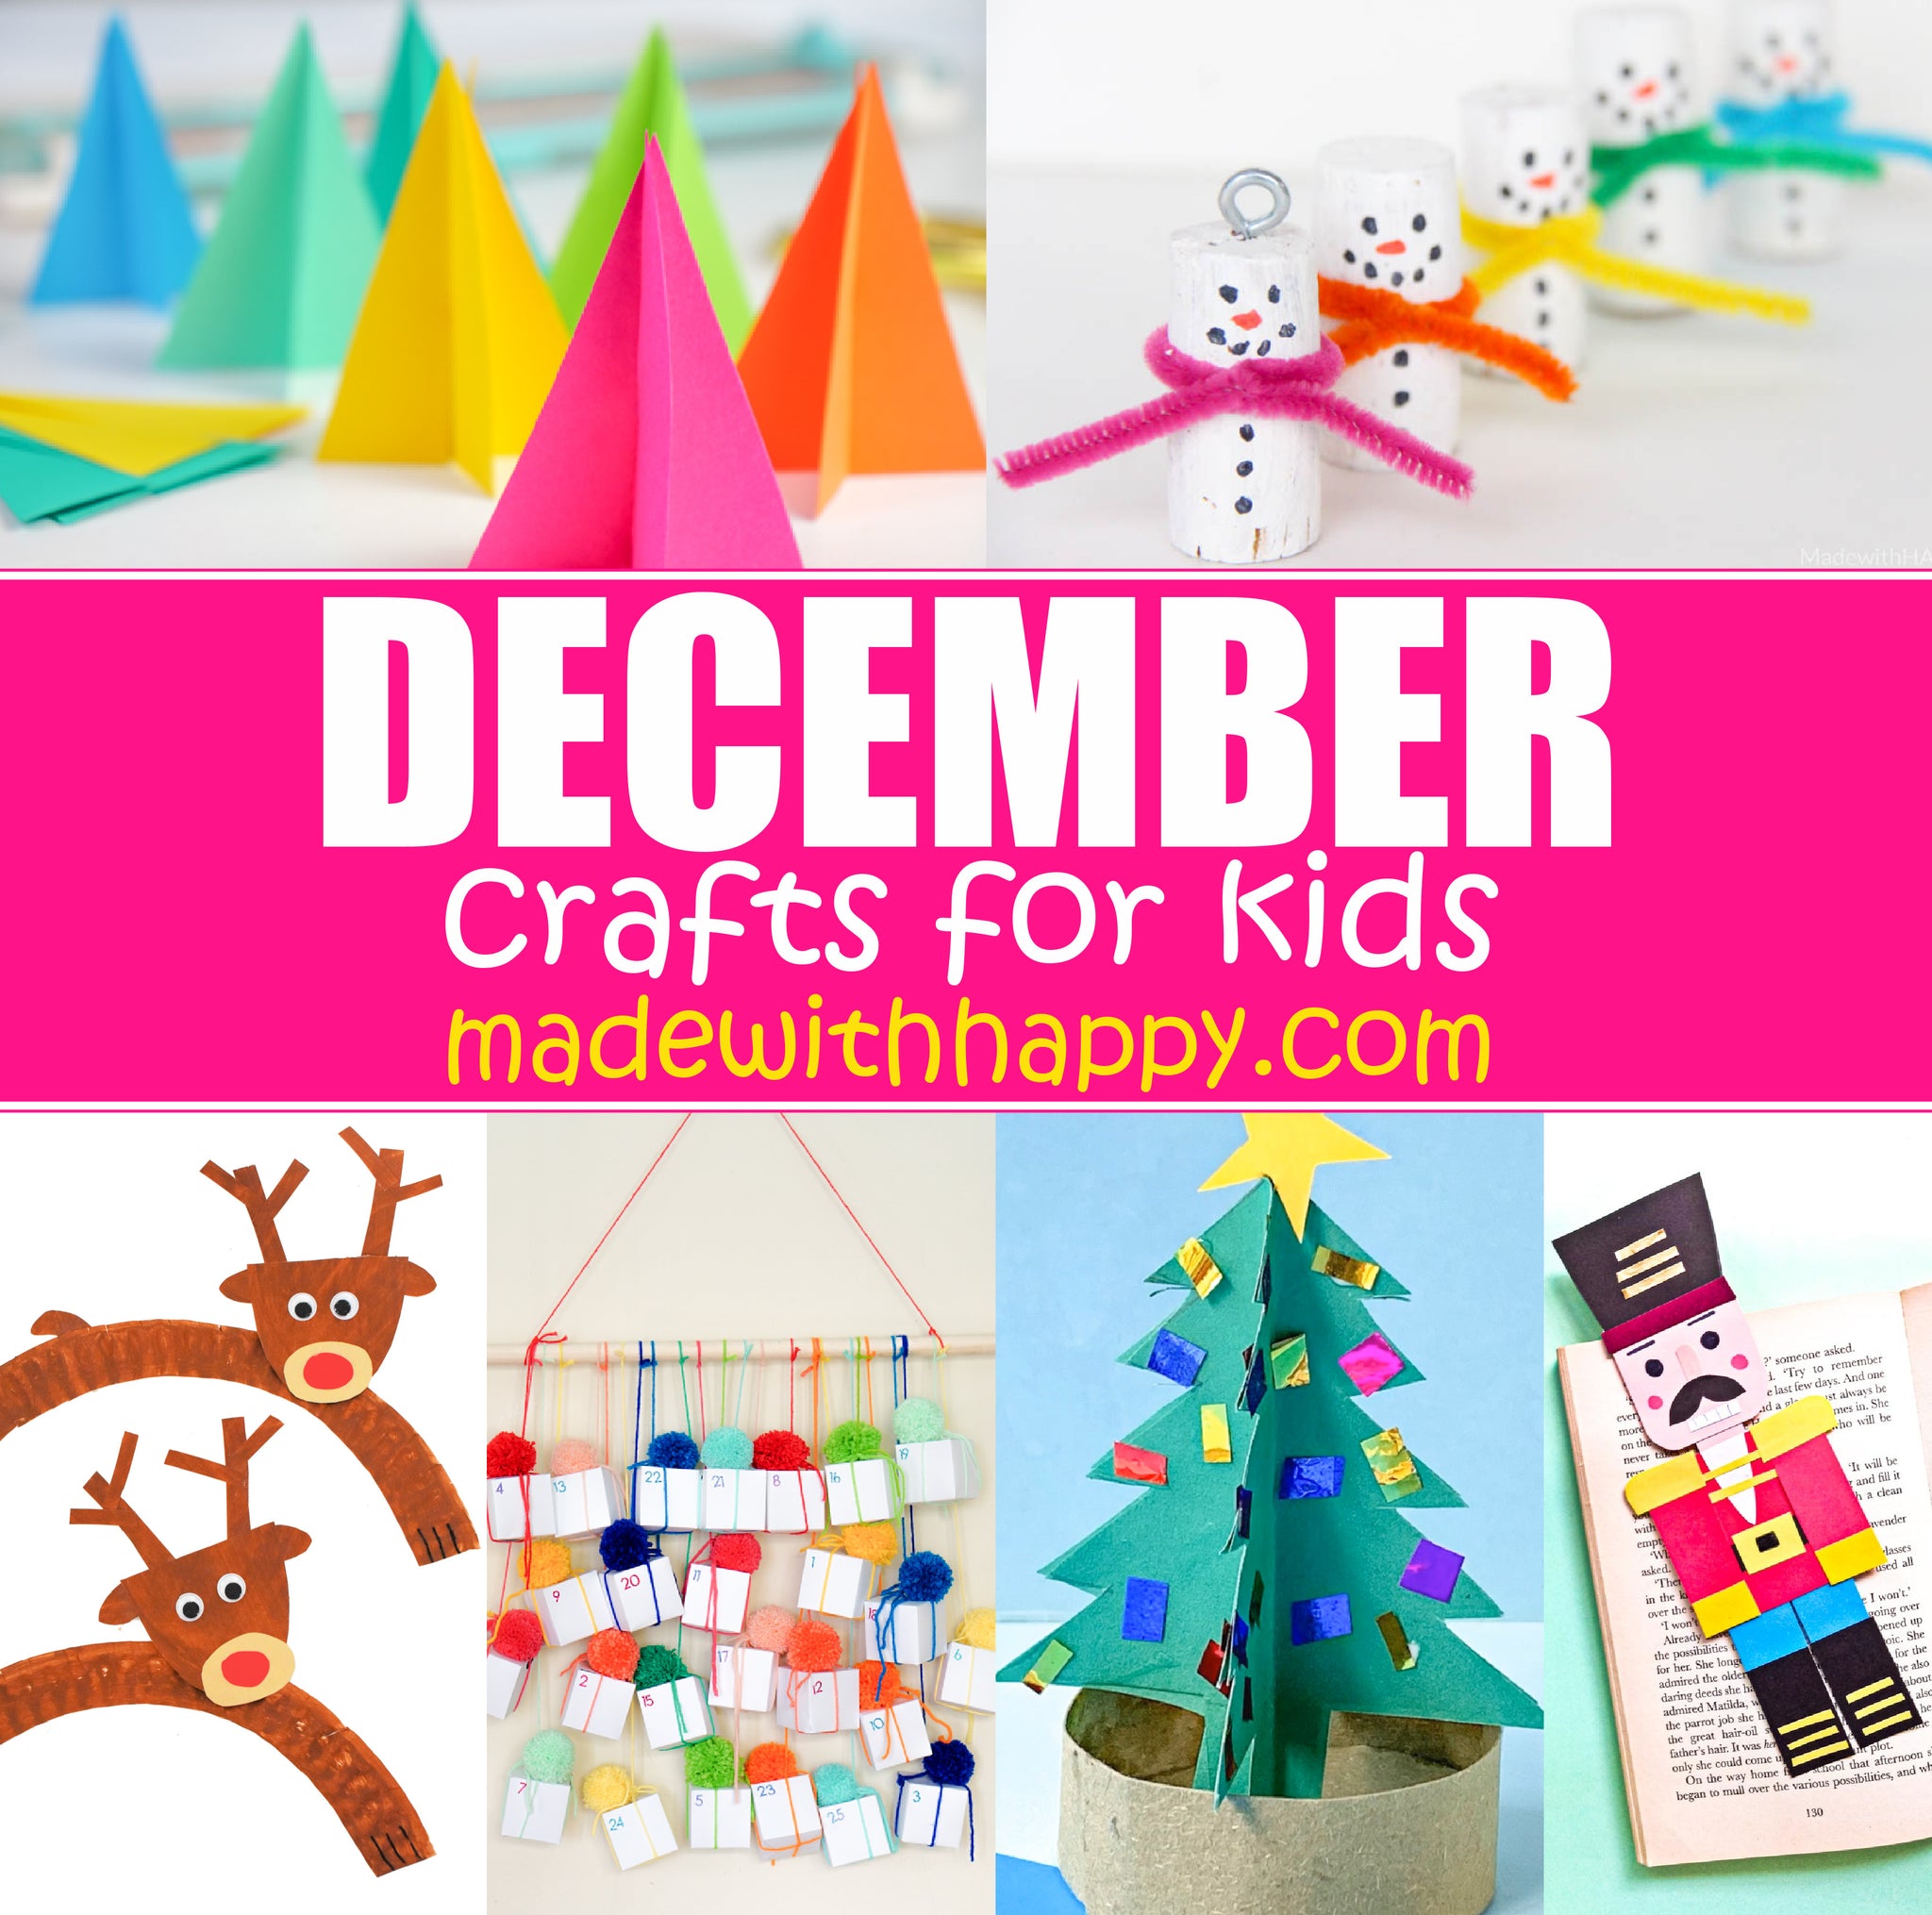 December Crafts For Kids - 25+ Crafts and Coloring Pages